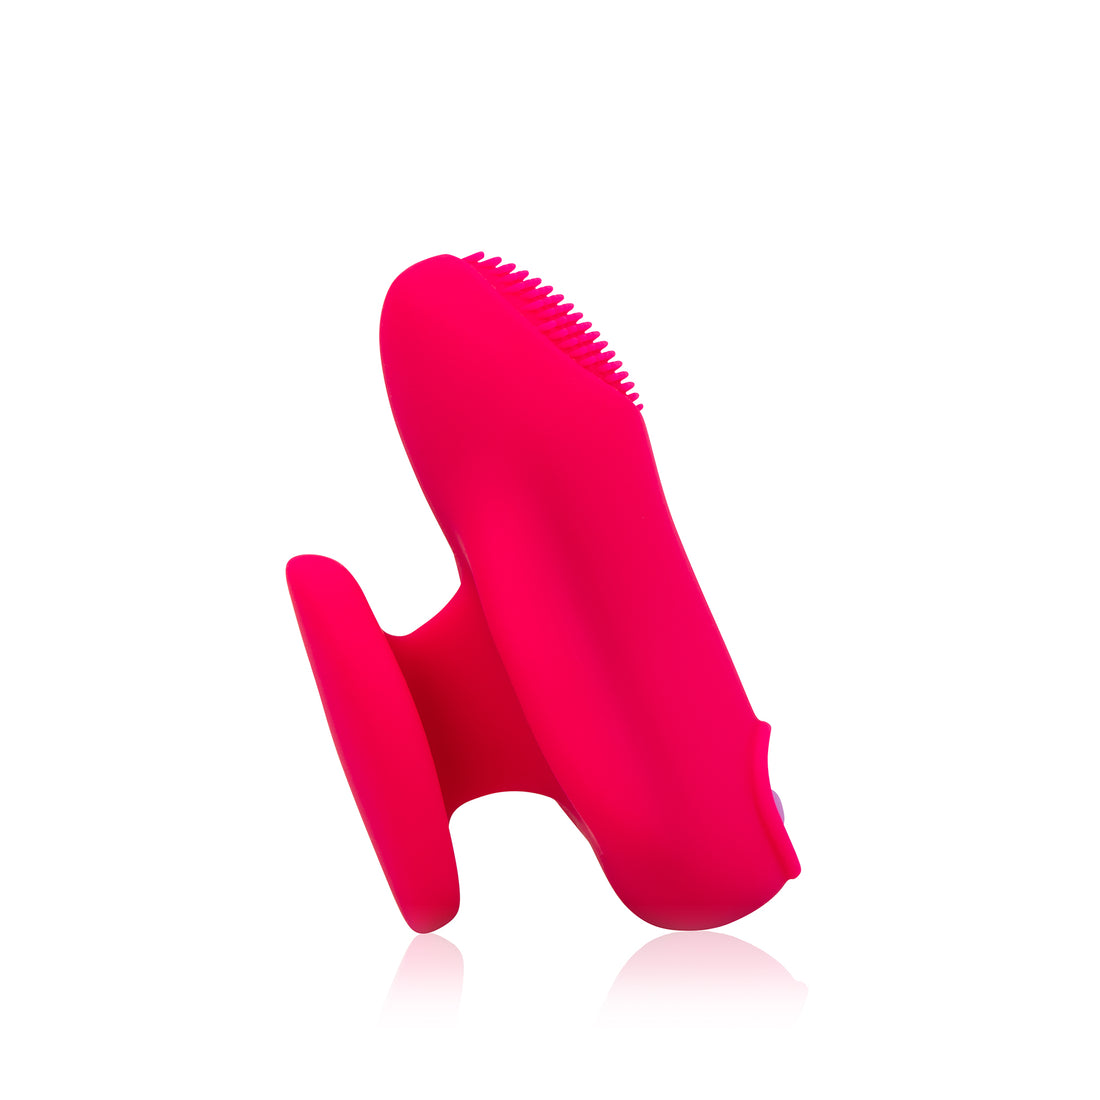 Vibrator Side image of the Sleeve in the red color for bullet vibrators